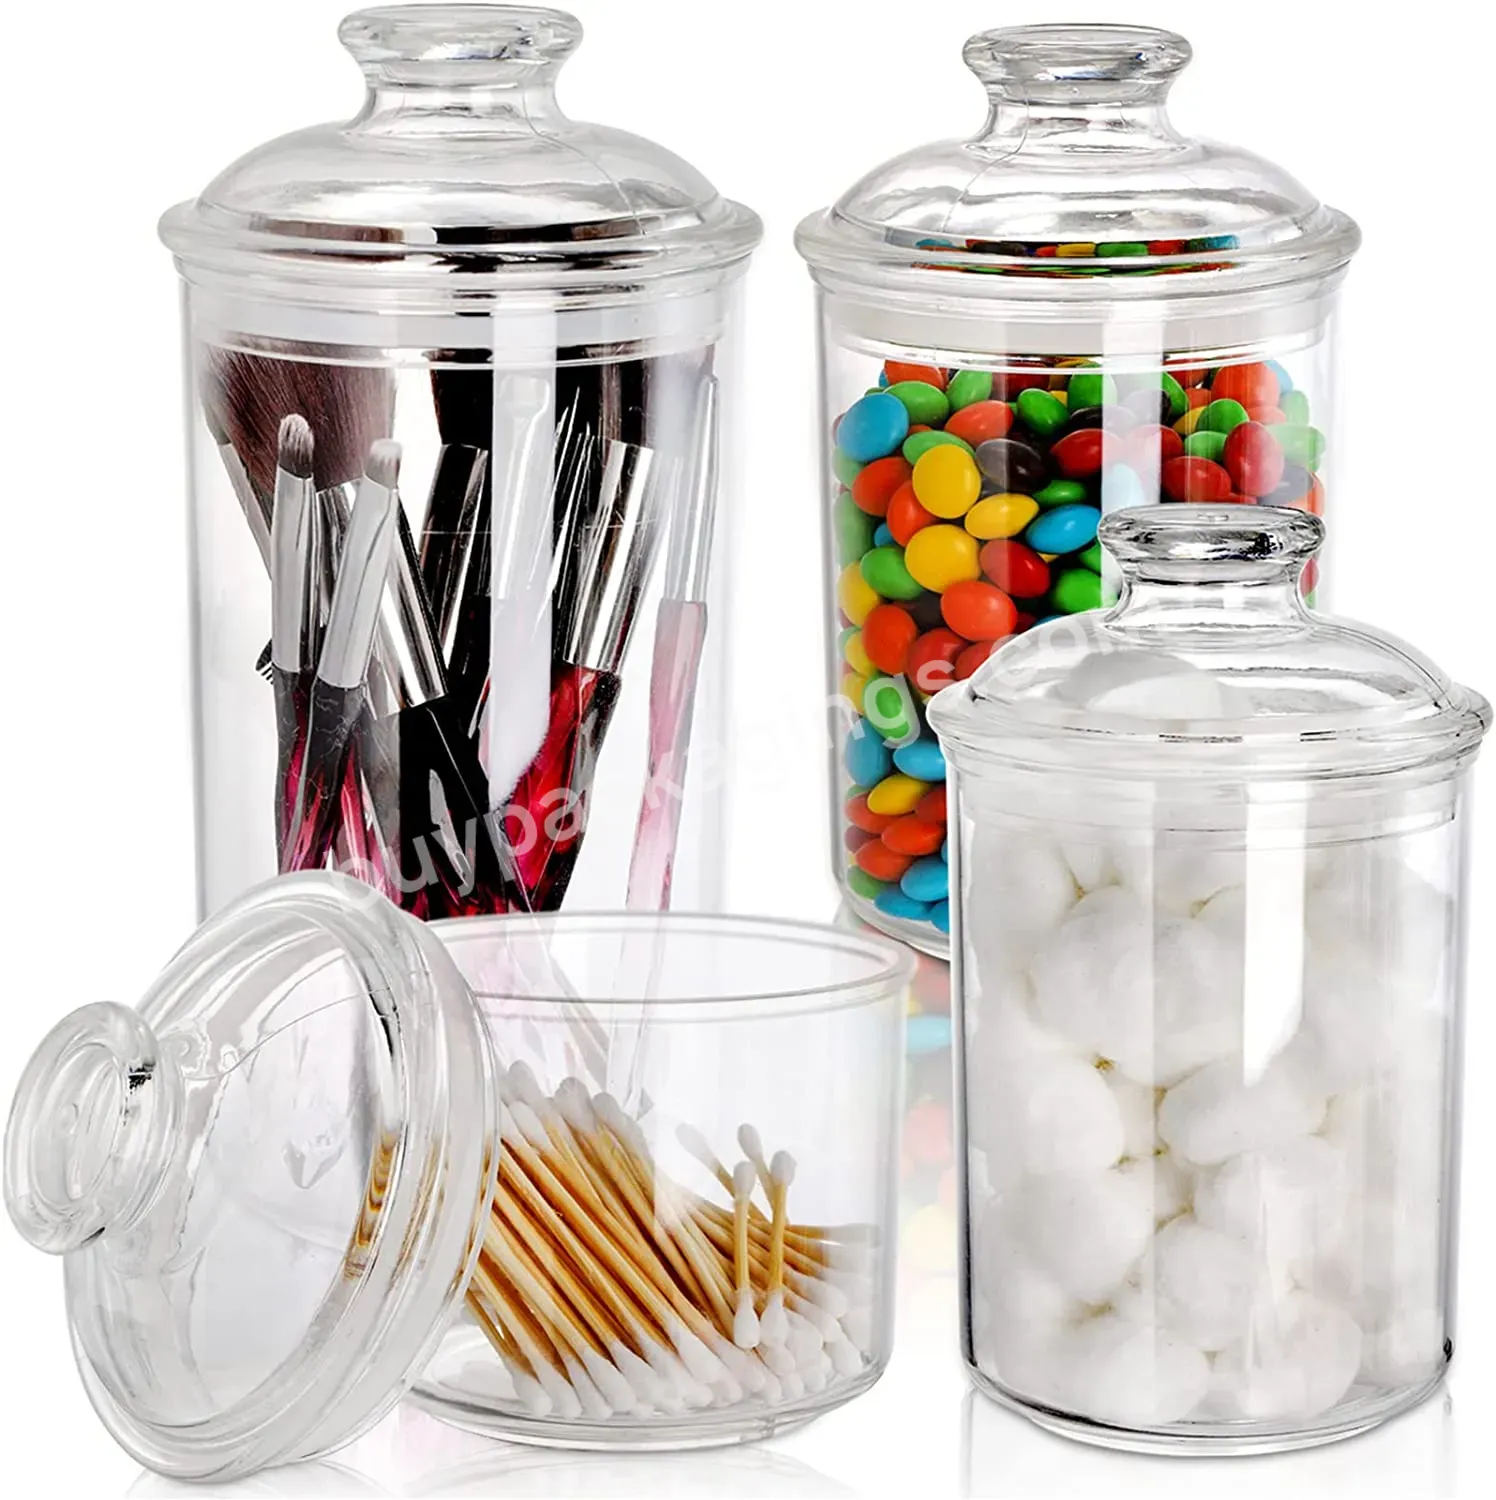 Clear Plastic Apothecary Jars Plastic Storage Jar Canister With Airtight Lid Candy Cookie Container Organizer For Bath Salt Pad - Buy 33 Oz/23 Oz/13 Oz Plastic Storage Jar Canister With Airtight Lid,Candy Cookie Container Organizer For Bath Salt Pad,